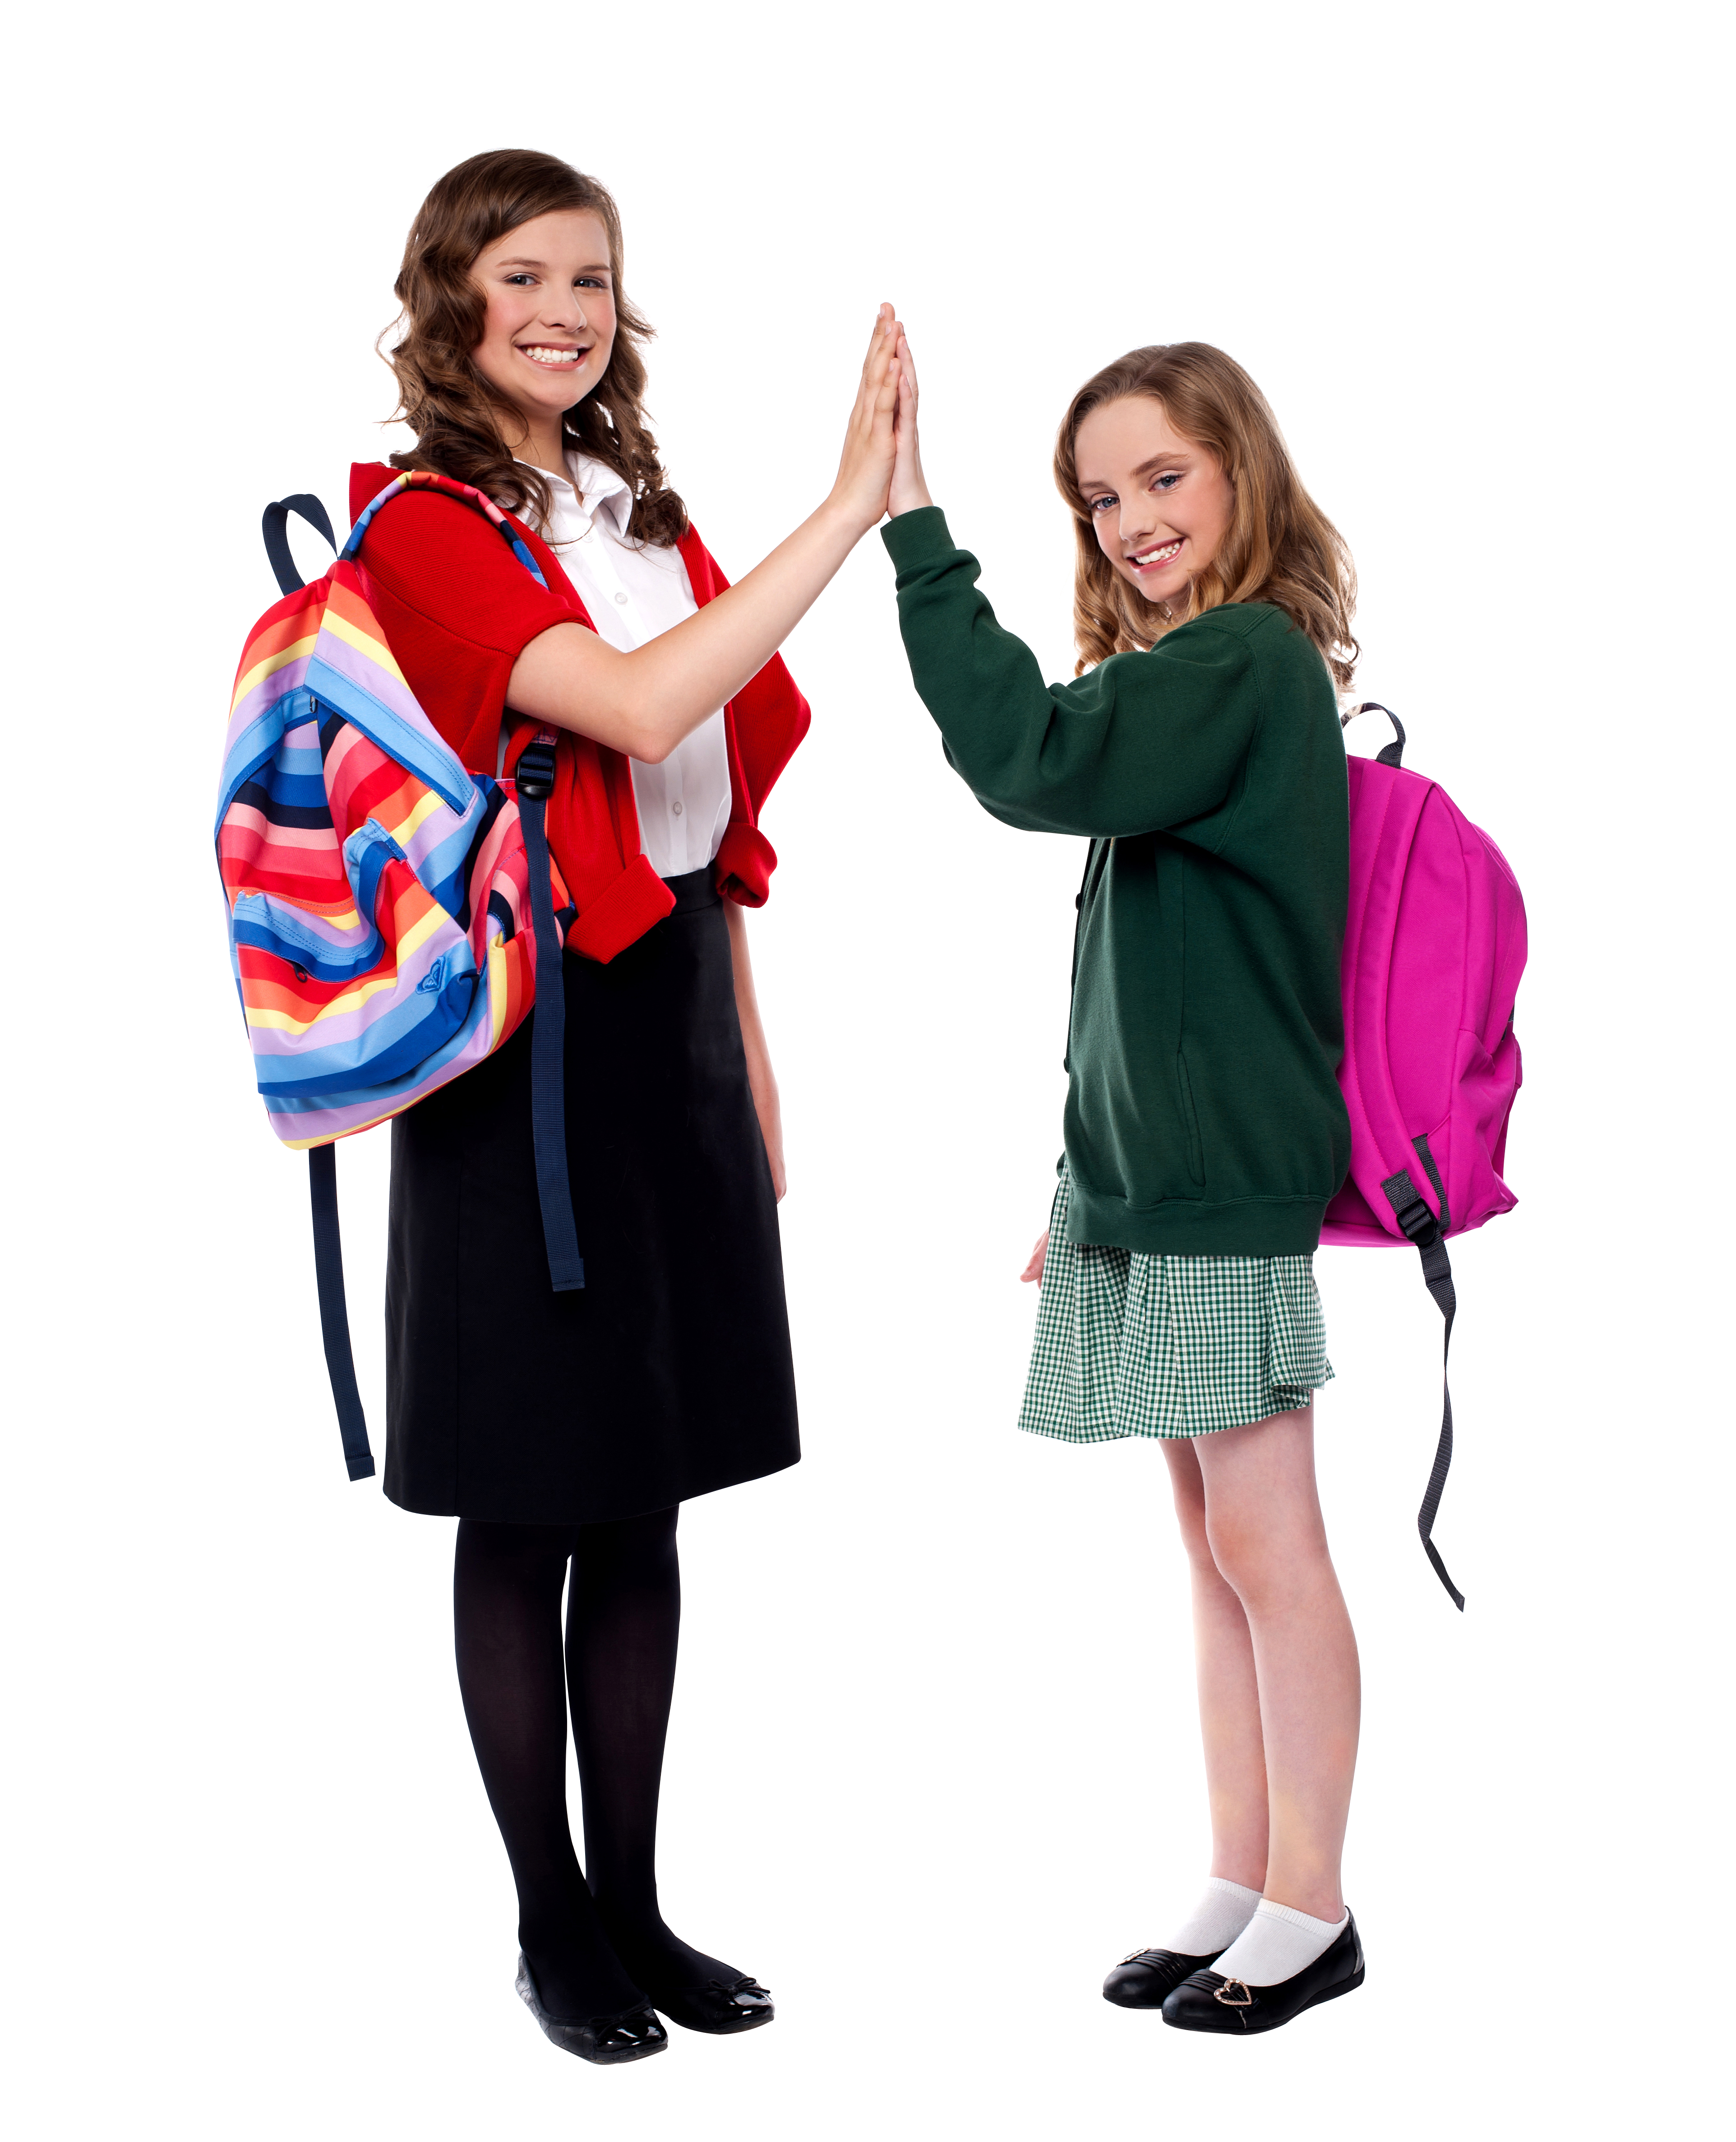 Young Girl Student Png Image Purepng Free Transparent Cc0 Png Image